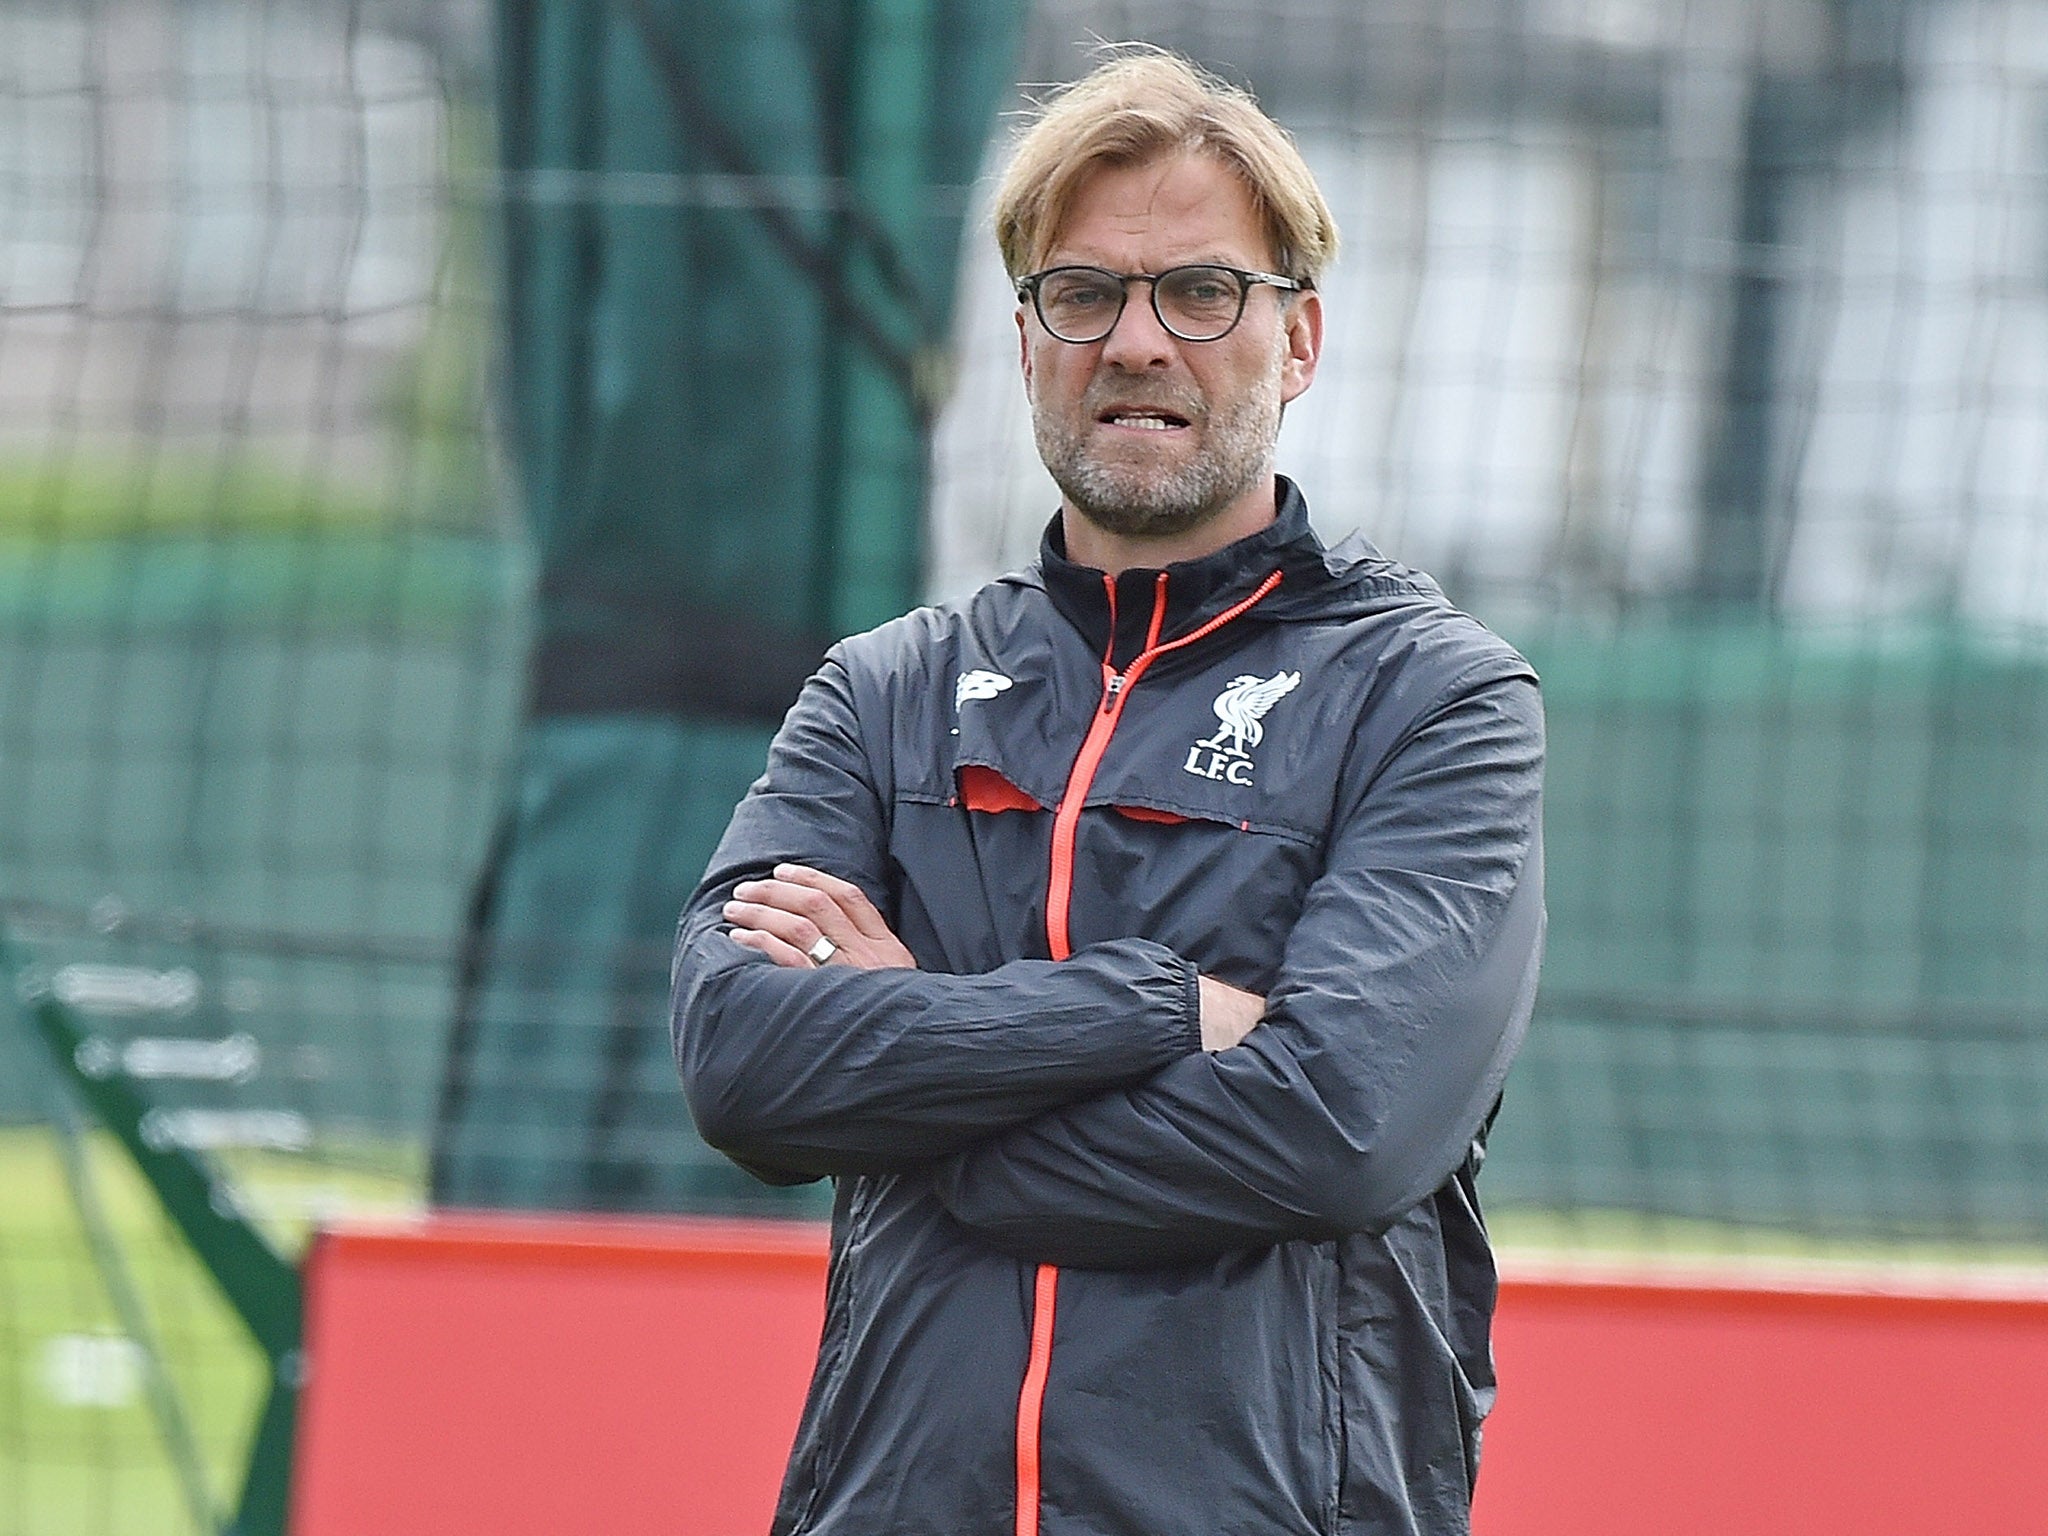 Klopp said qualifying for the Champions League would take Liverpool into a 'new era'